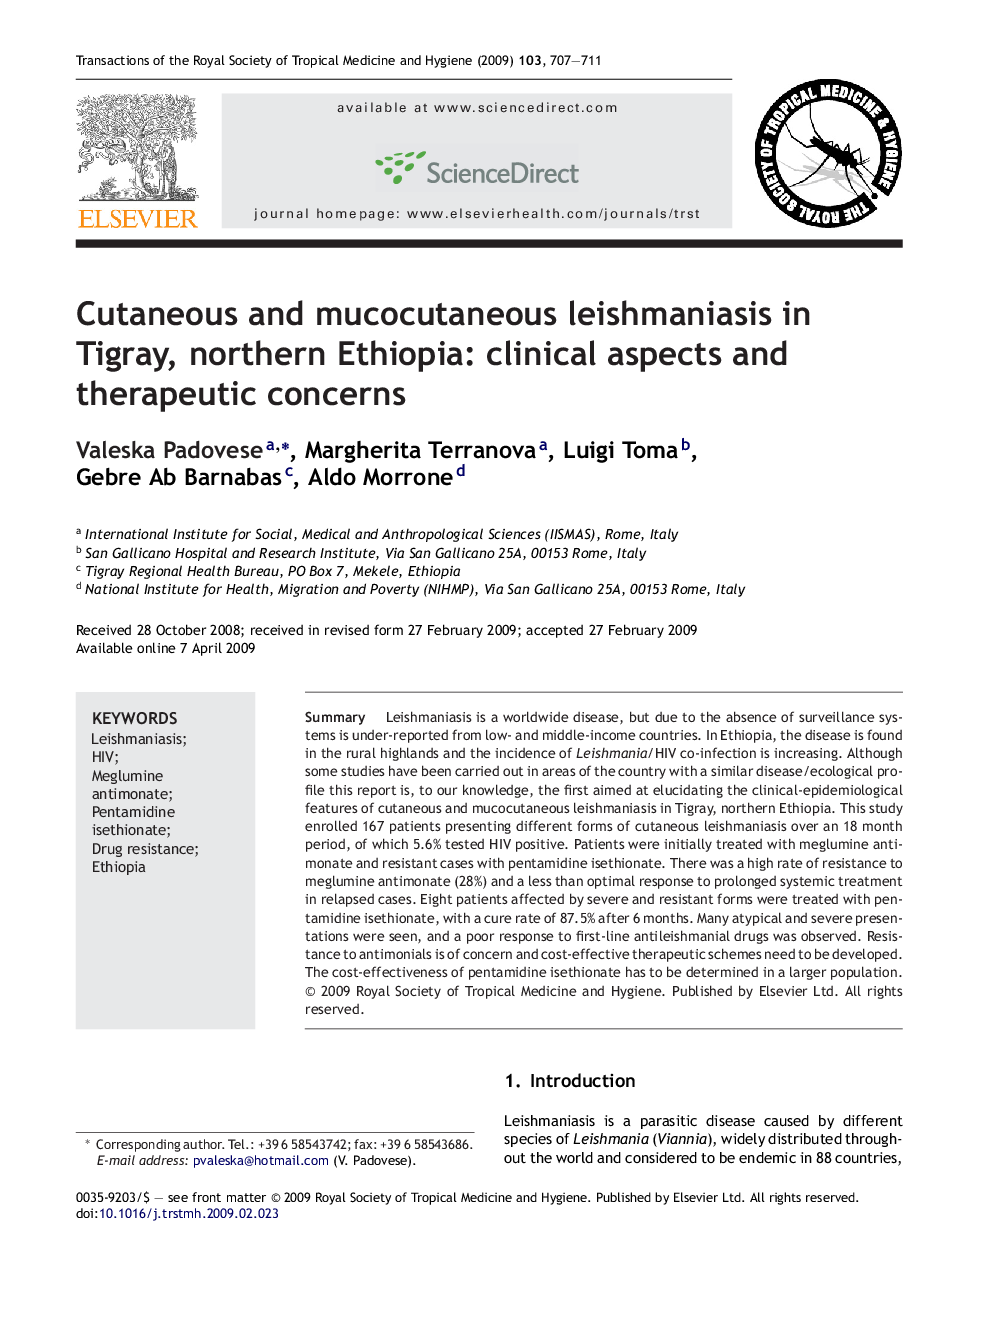 Cutaneous and mucocutaneous leishmaniasis in Tigray, northern Ethiopia: clinical aspects and therapeutic concerns